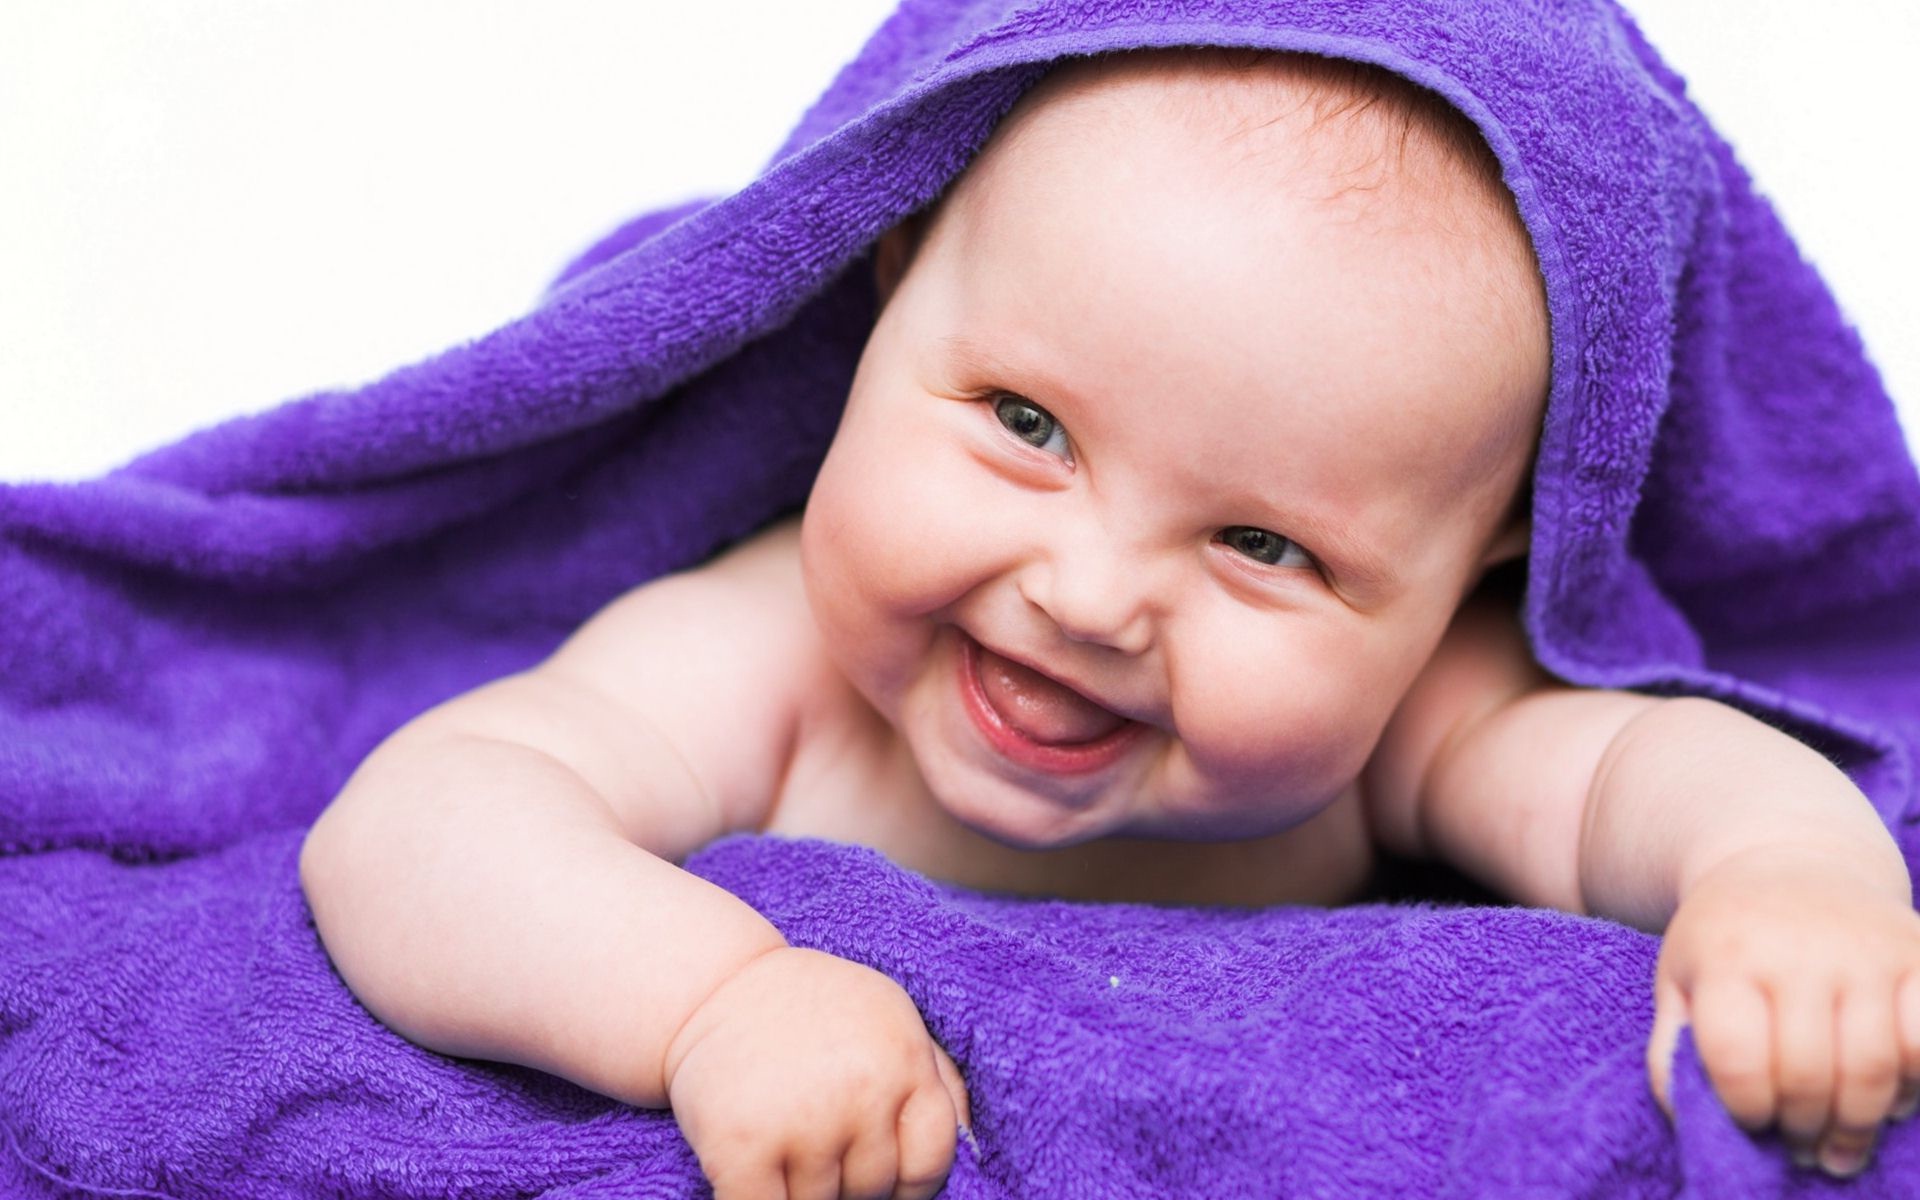 Cute Baby Smile In Blue Blanket - Cute Baby Photos With A Smile , HD Wallpaper & Backgrounds